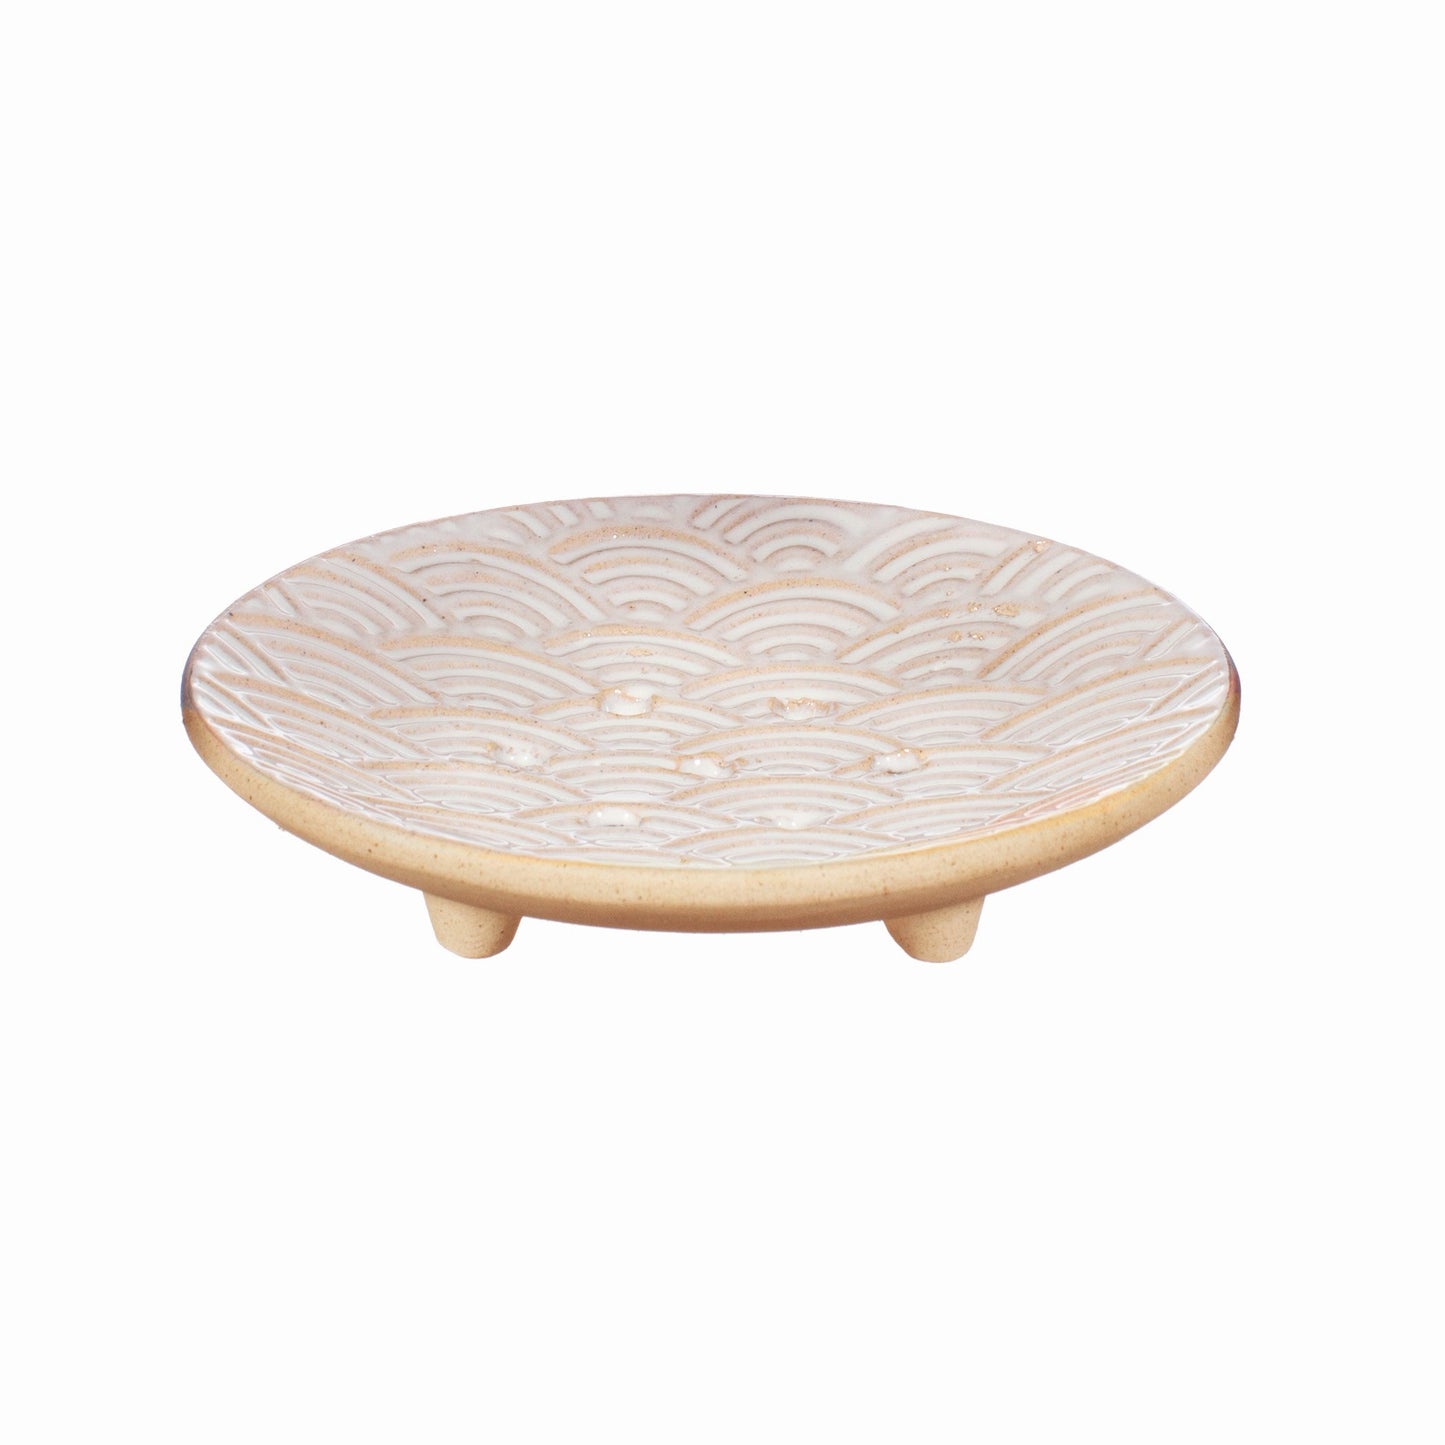 Sass and Belle Japandi Seigaha Wave Pattern Soap Dish